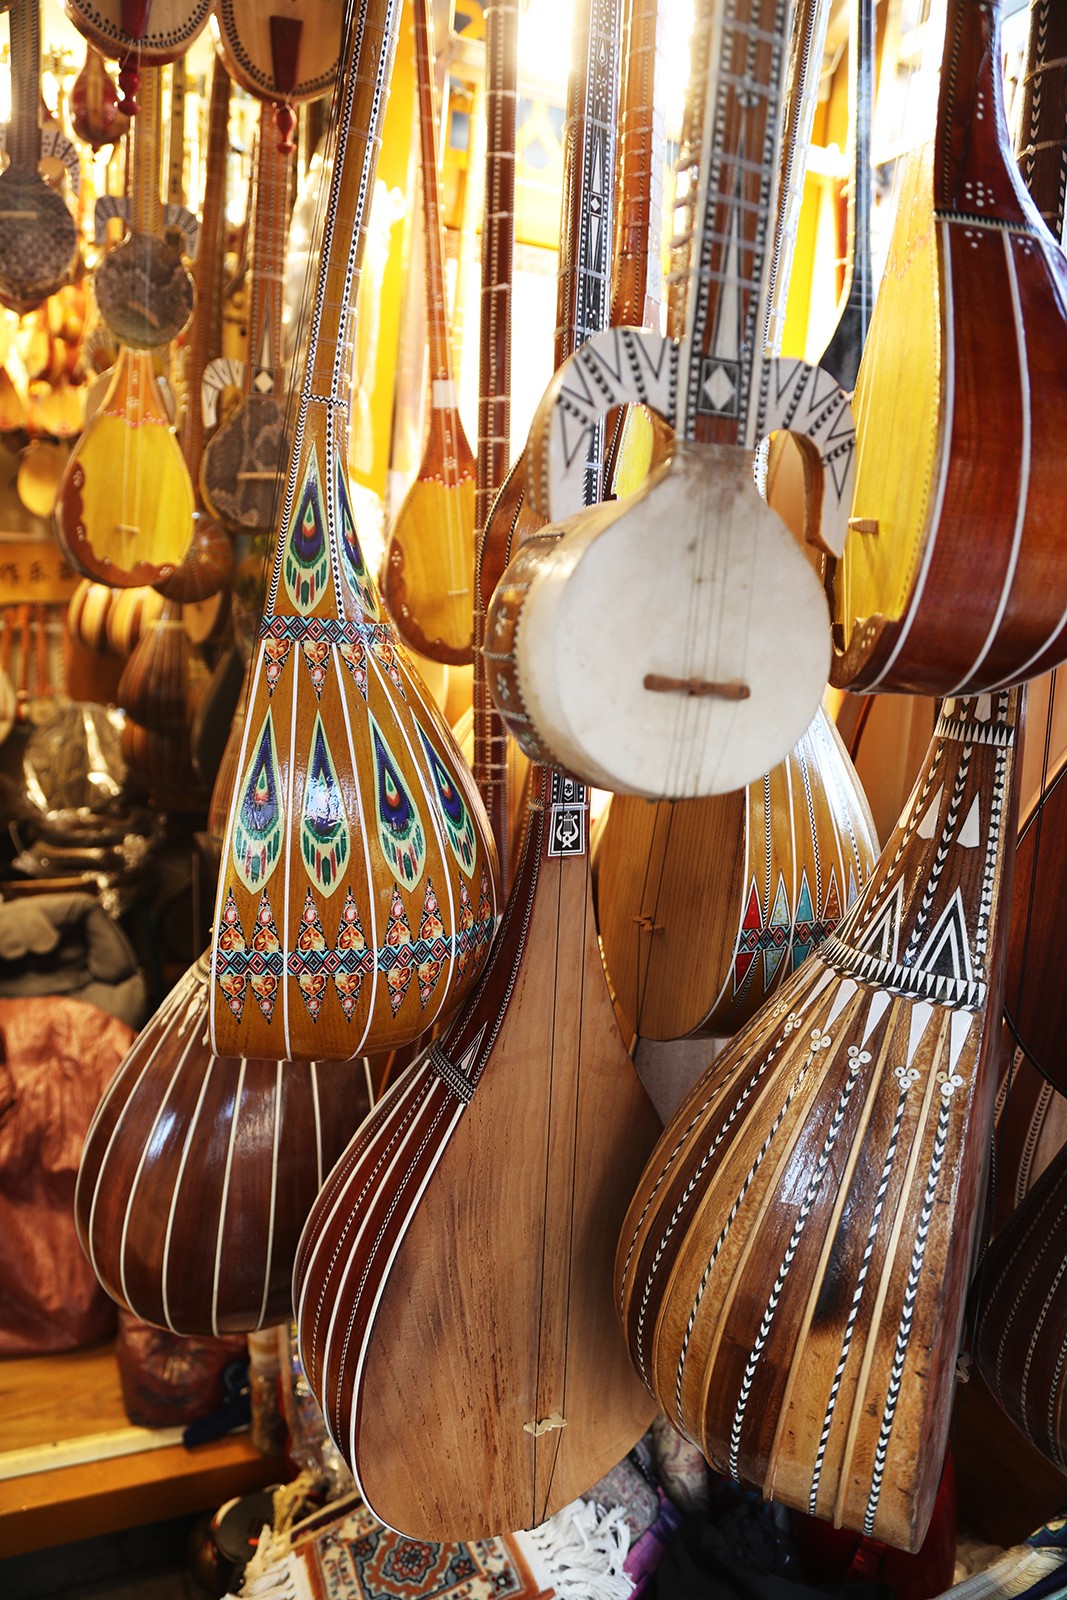 A diverse range of local musical instruments are displayed for sale at the Xinjiang International Grand Bazaar in Urumqi. /CGTN